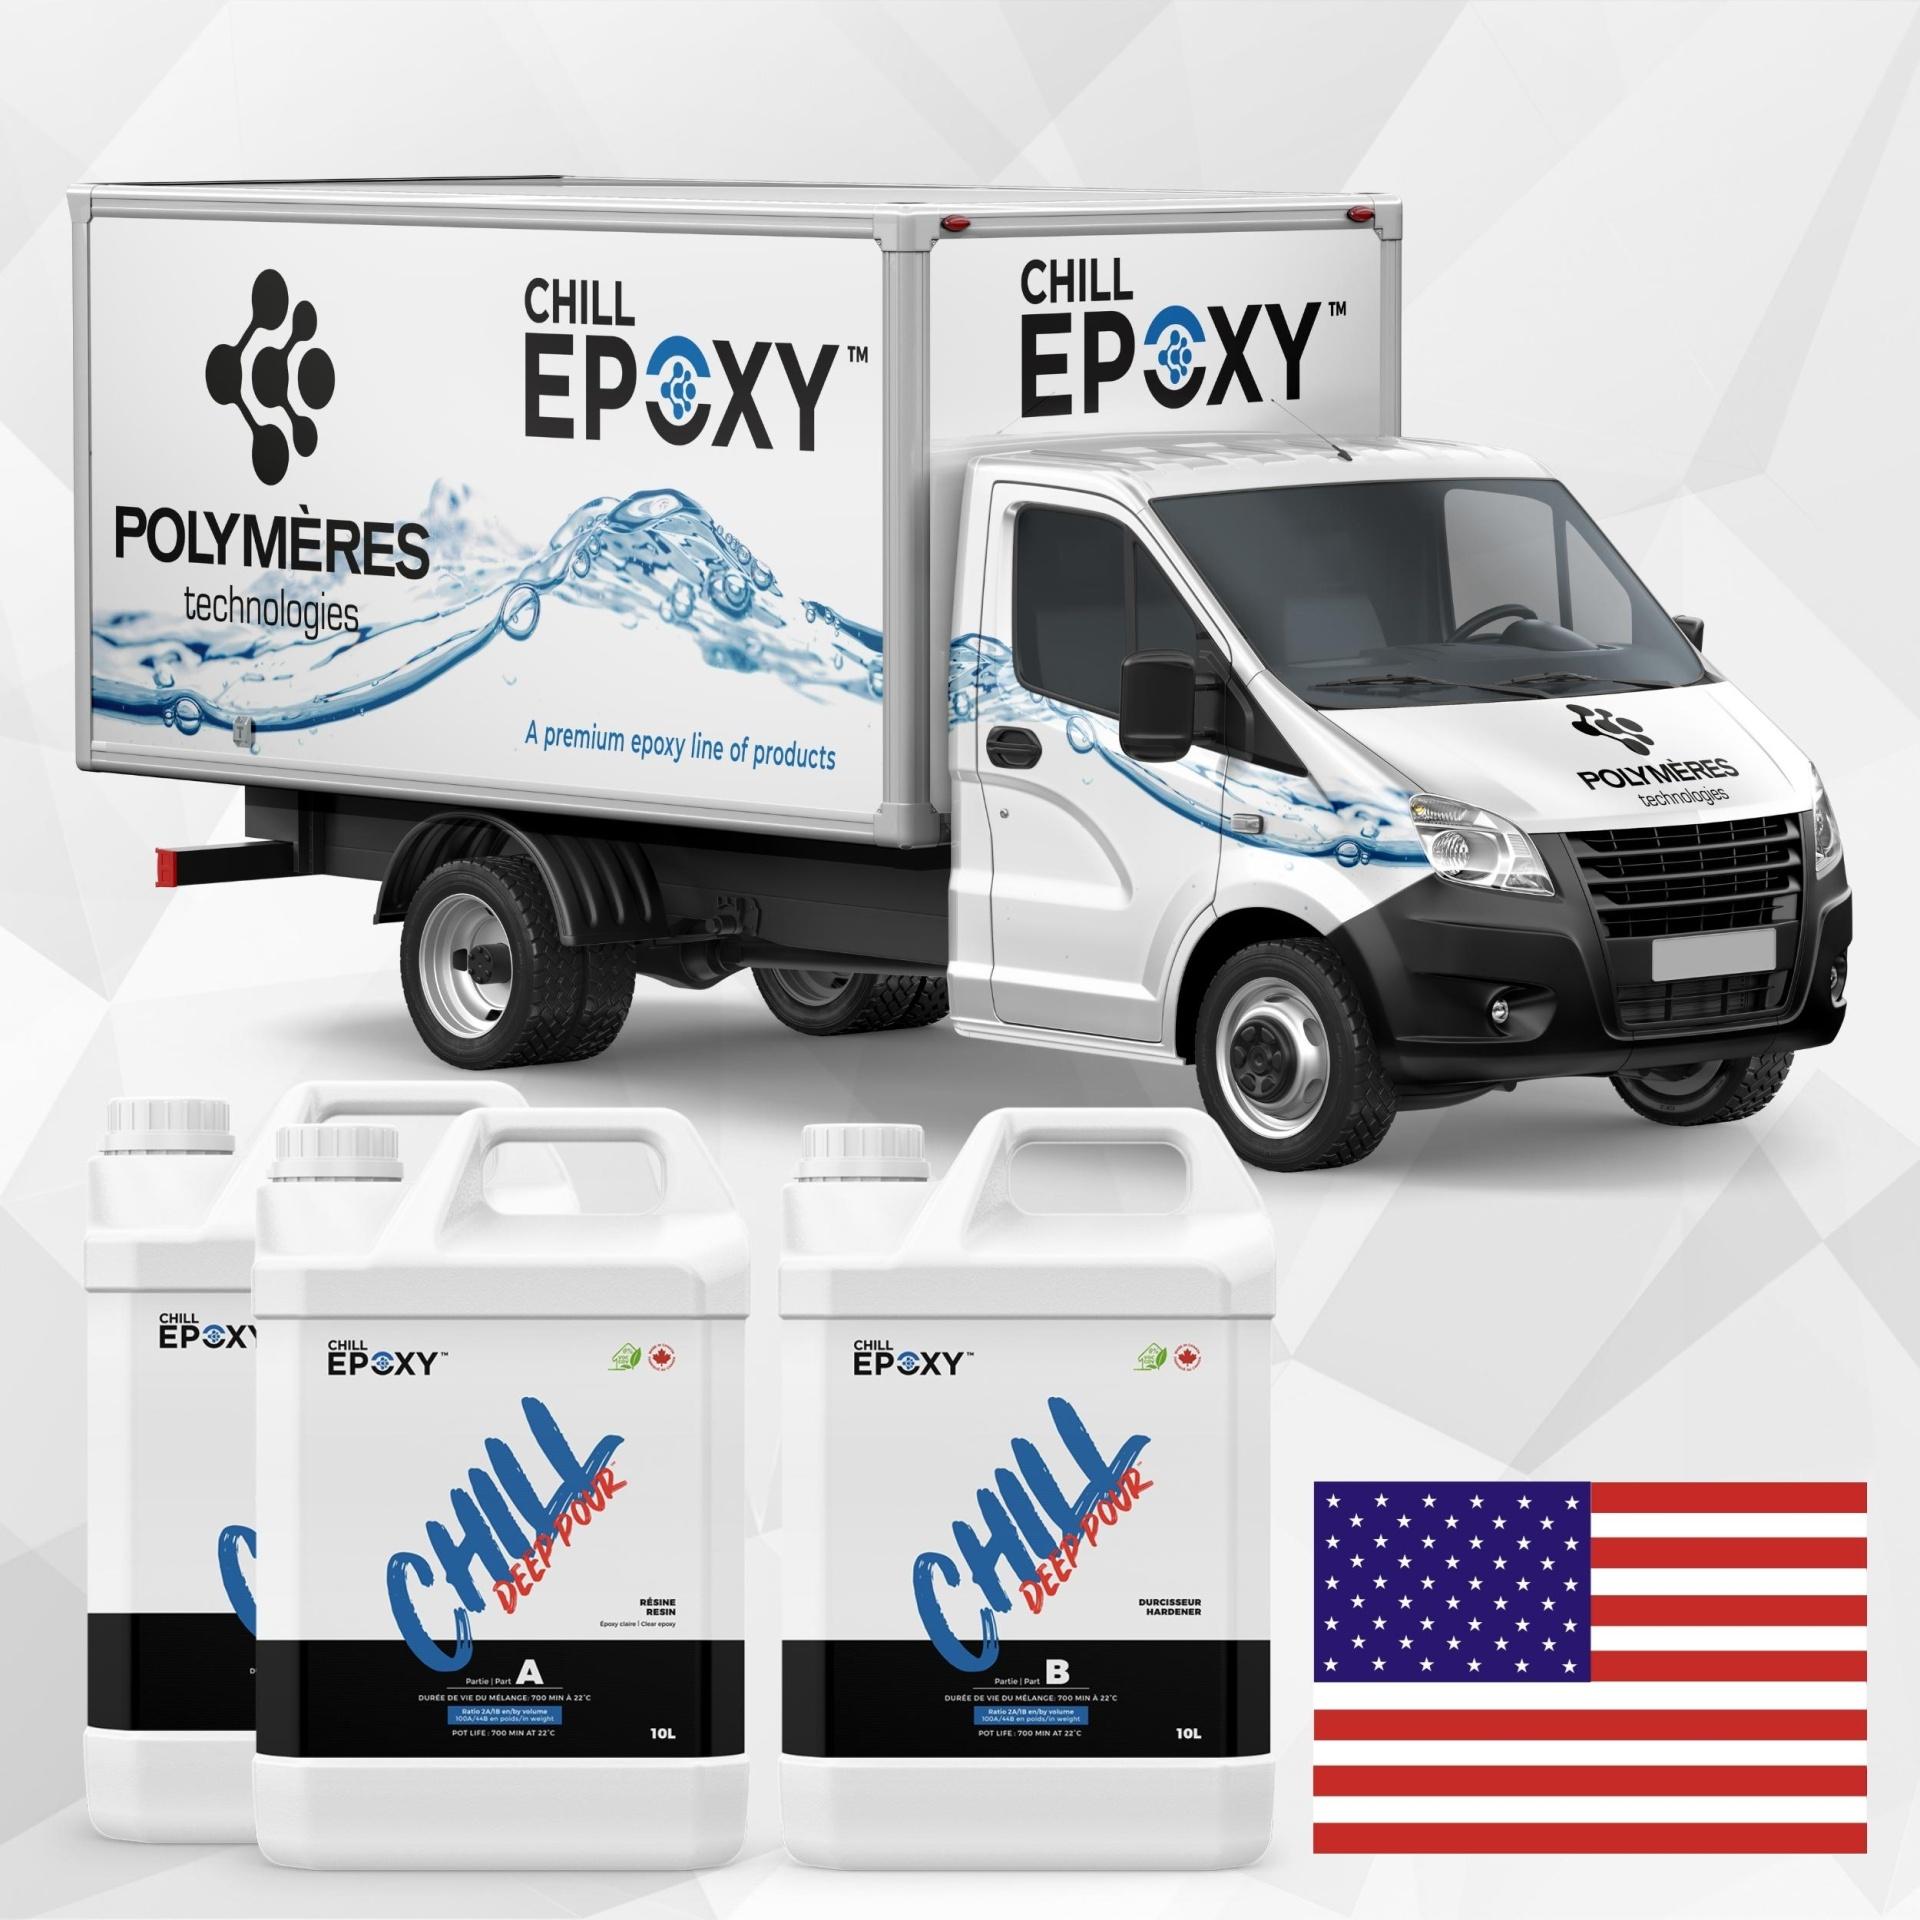 CHILL EPOXY - Available in the United States?